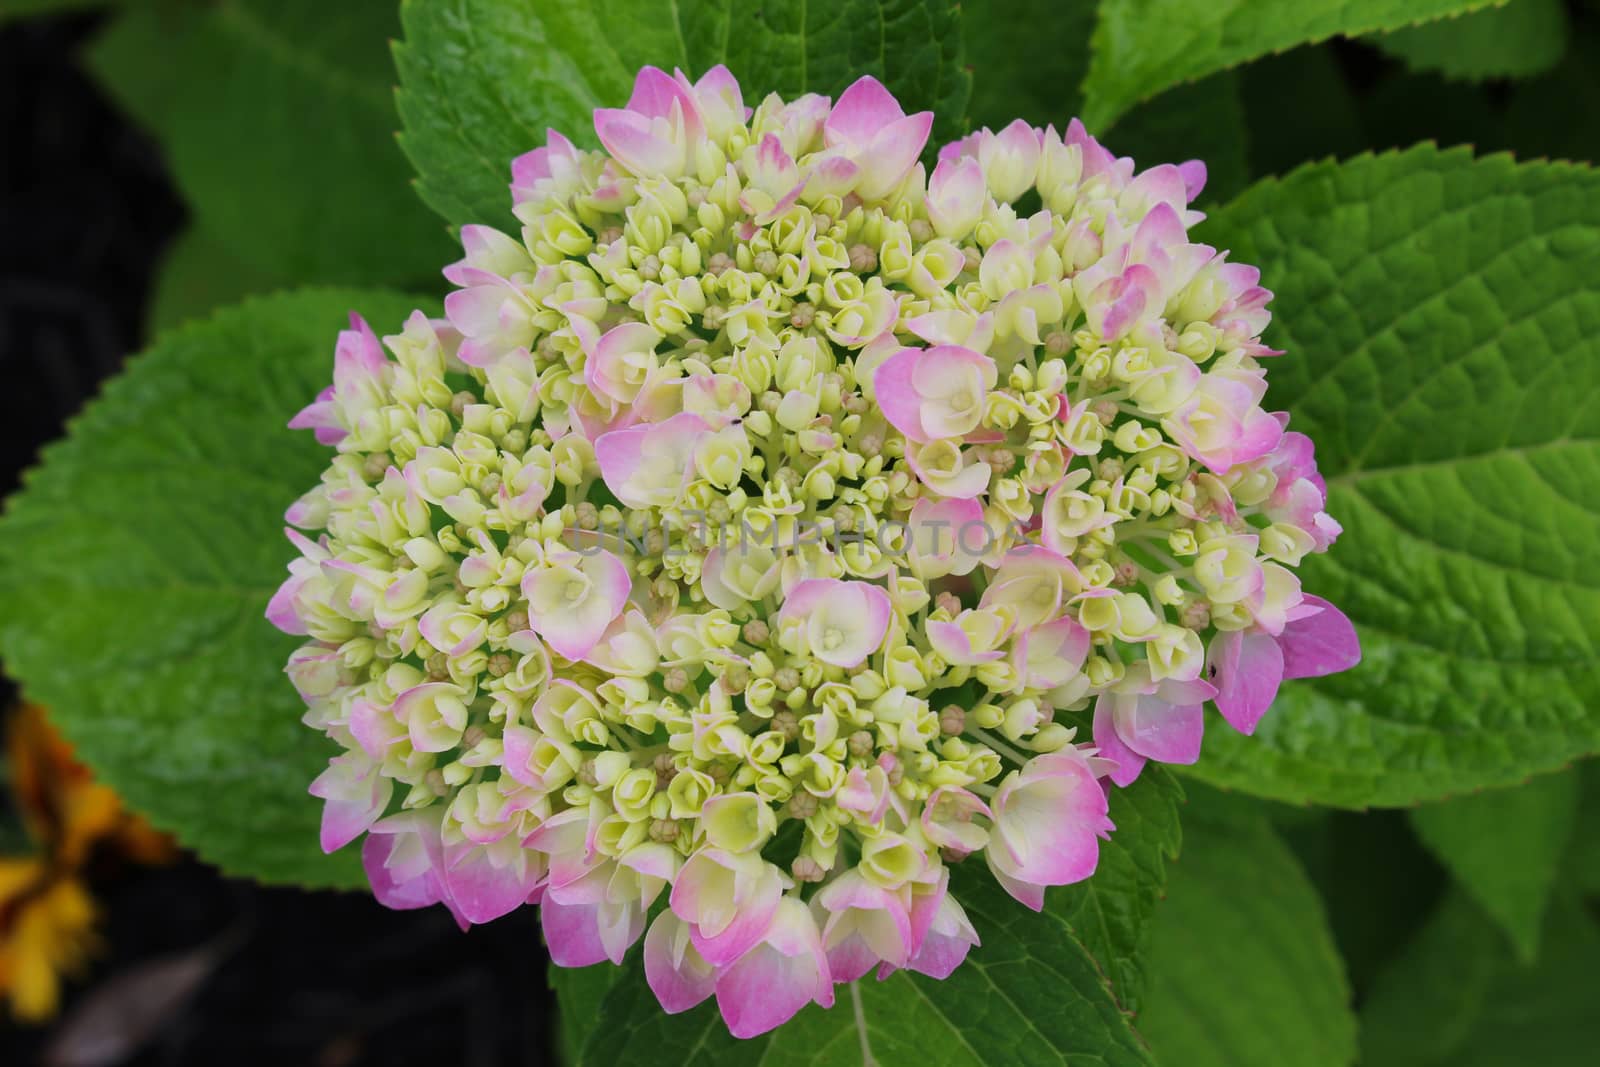 Hydrangeas are extremely vigorous, long-lived shrubs that offer varied and extravagant blooms throughout summer and into fall, when many shrubs have completed their show. Modern selections come in enticing shades of white, cream, pink, blue, and red, and in lacecap and oakleaf shapes as well as the familiar mophead. The big, rounded flower clusters make handsome dried arrangements. Hydrangeas can show off in gardens or containers and, because they tolerate both wind and salt, make an ideal choice for the seaside summer cottage.